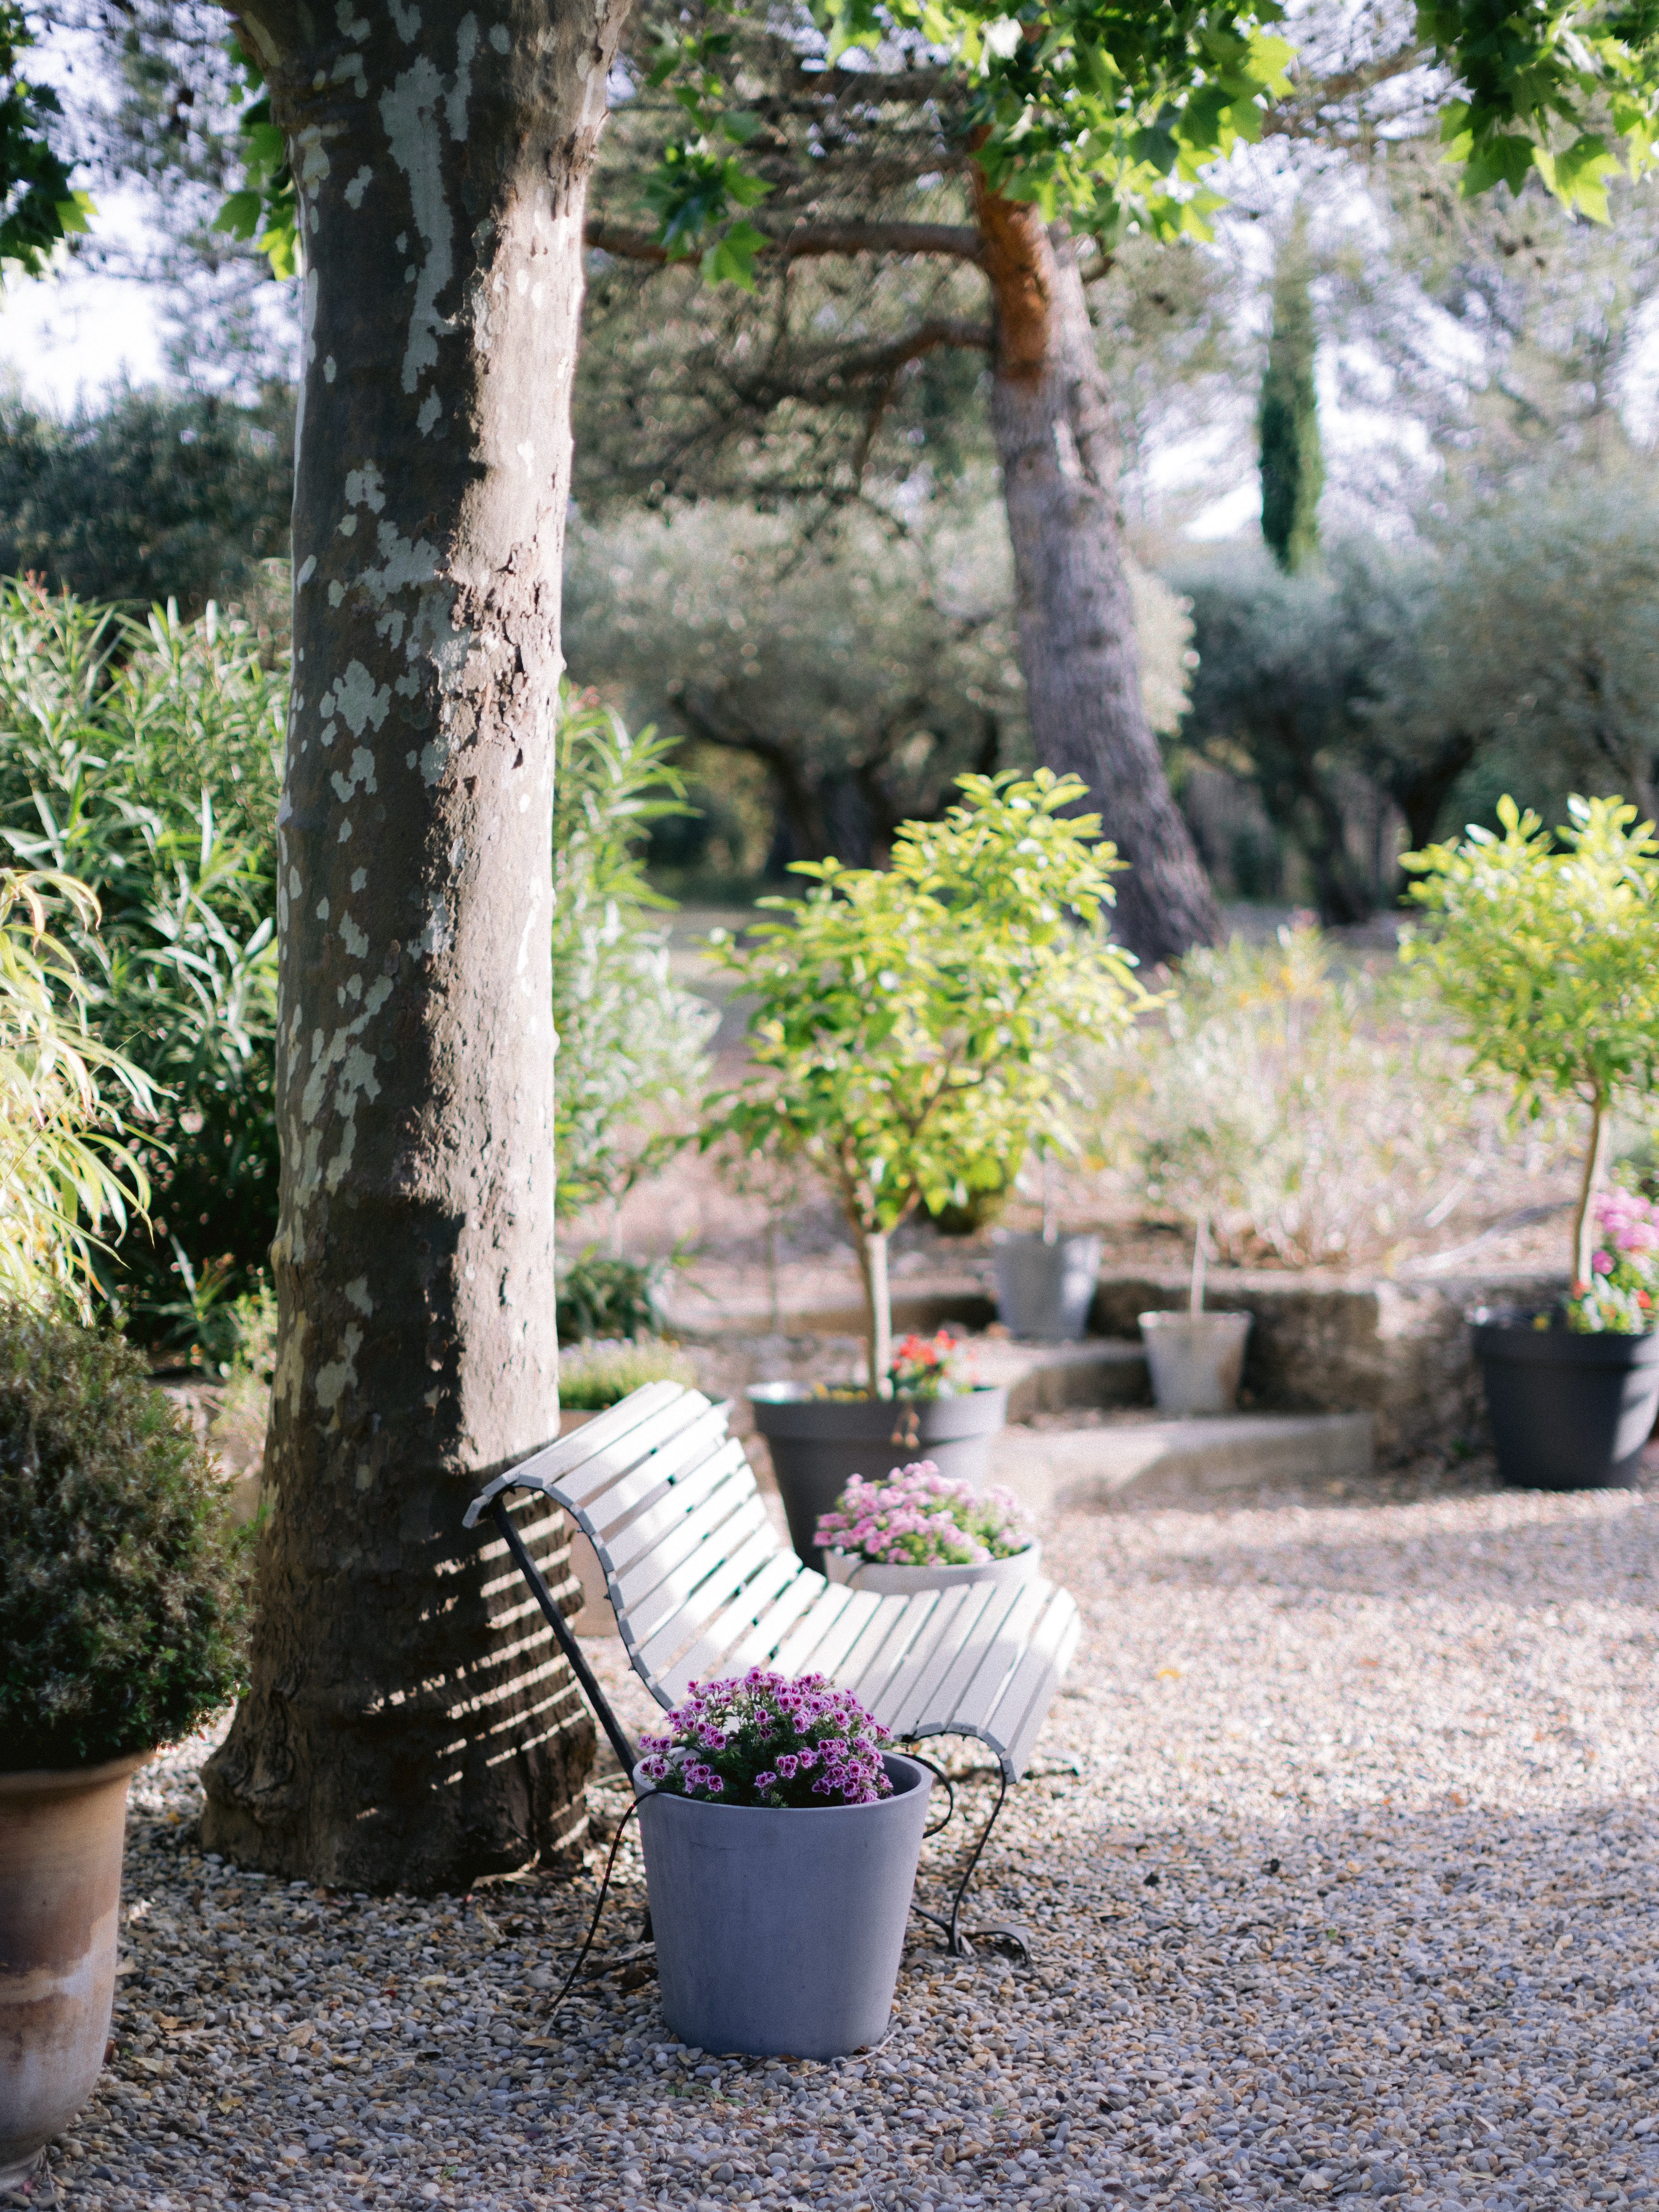 A serene garden with a bench under a tree, surrounded by potted plants and olive trees, bathed in soft daylight.